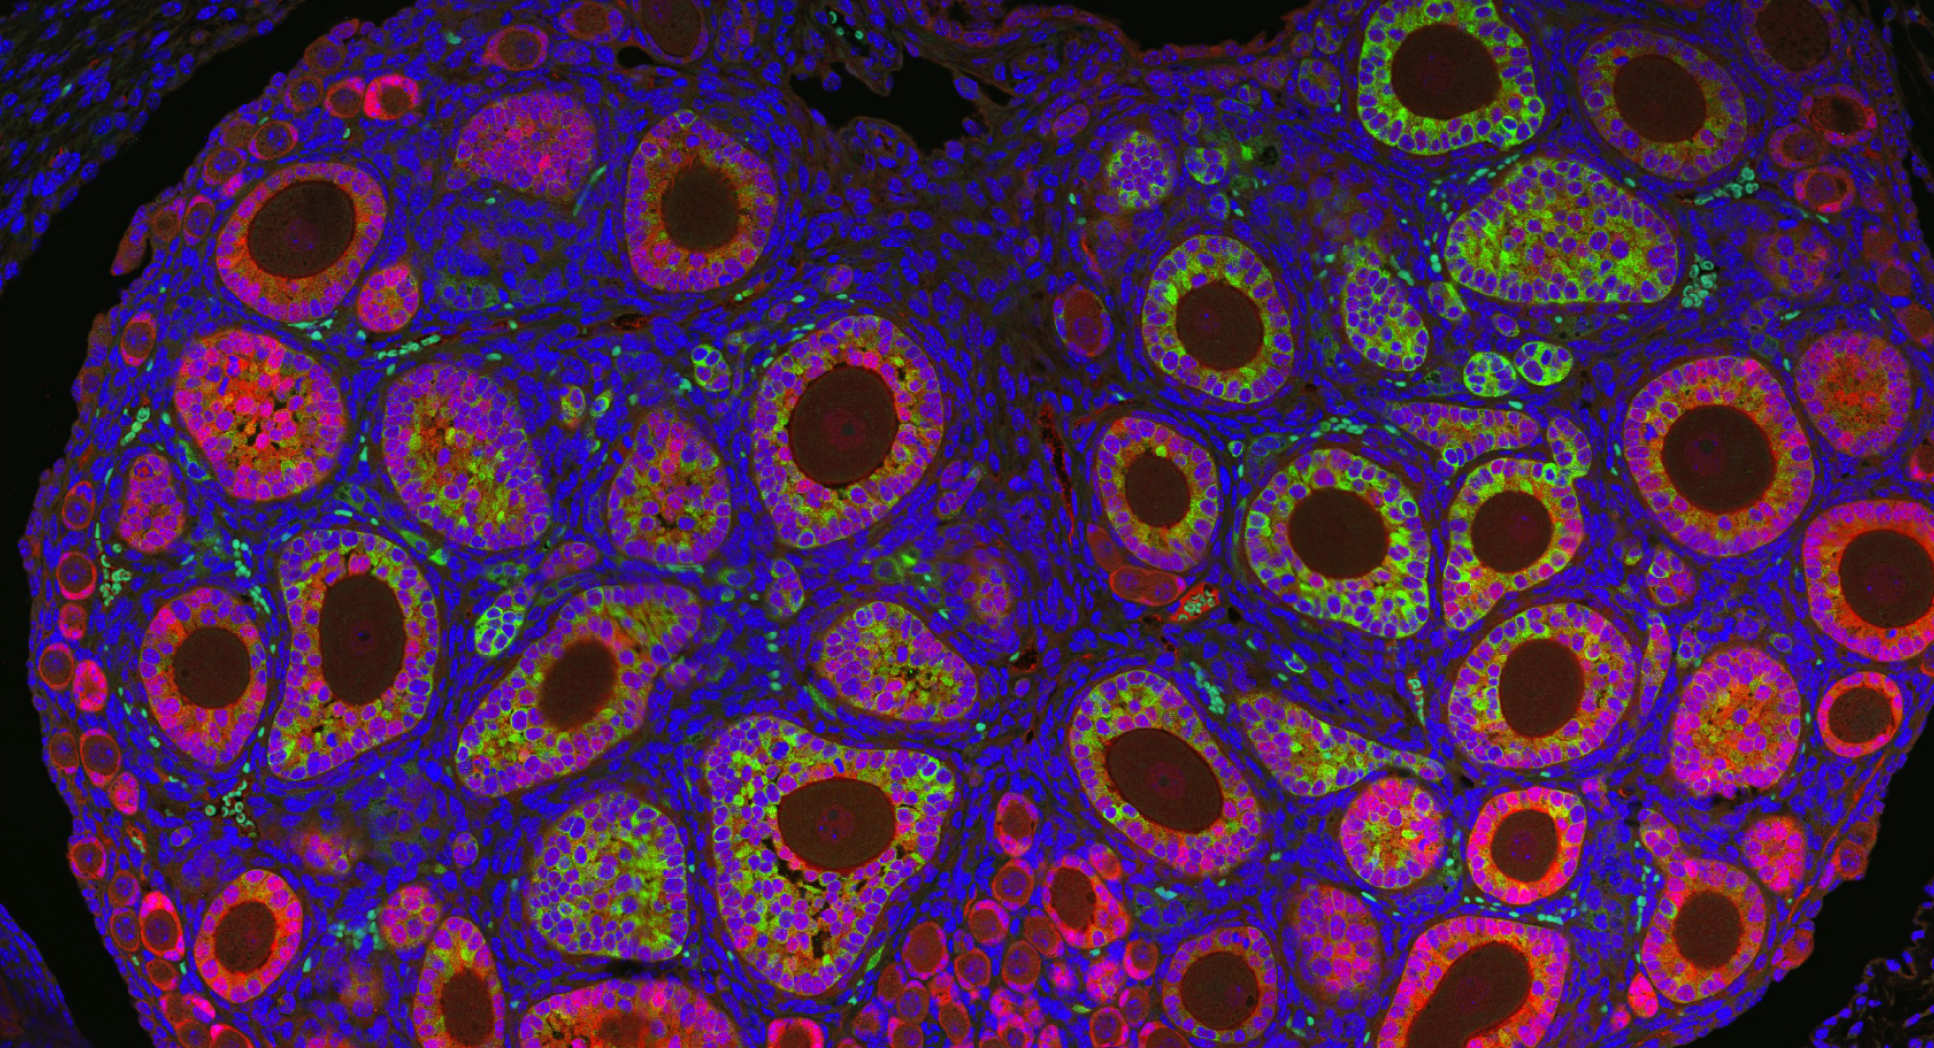 Cell image courtesy of Dr Mark Fenwick